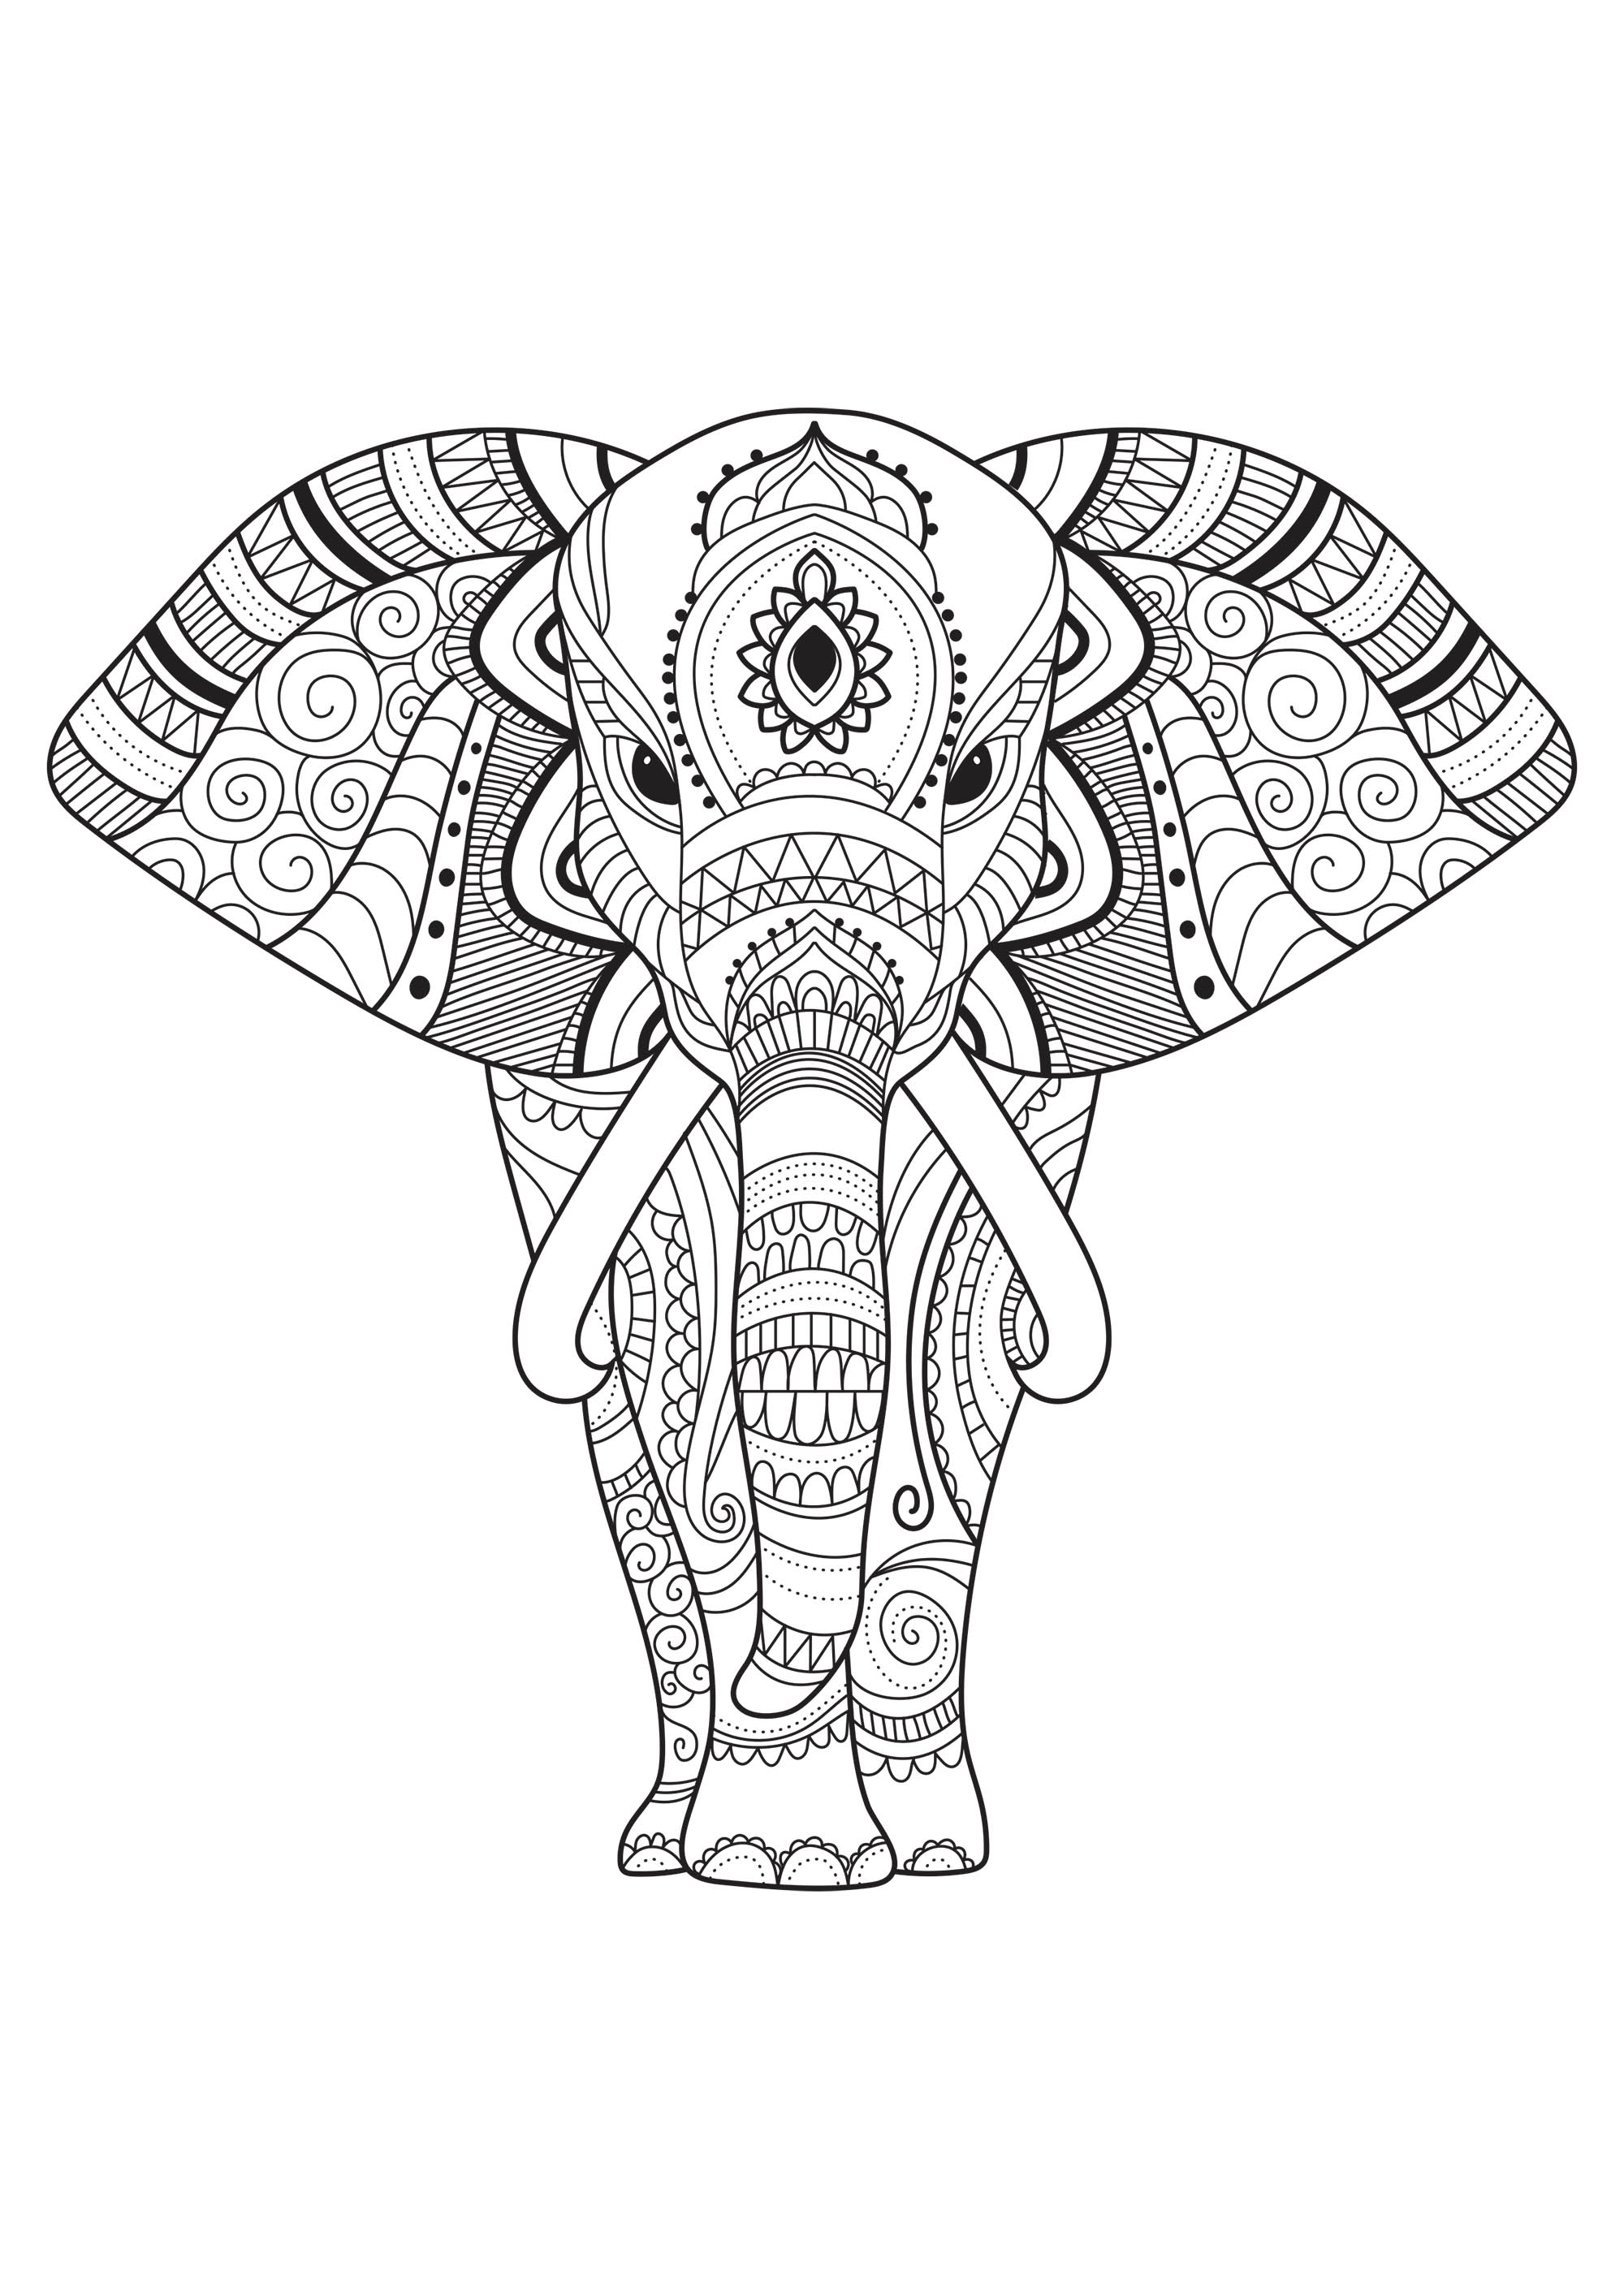 Simple patterns to color in this majestic elephant. Fourni par le site Gifts.com, Artist : Gifts.com